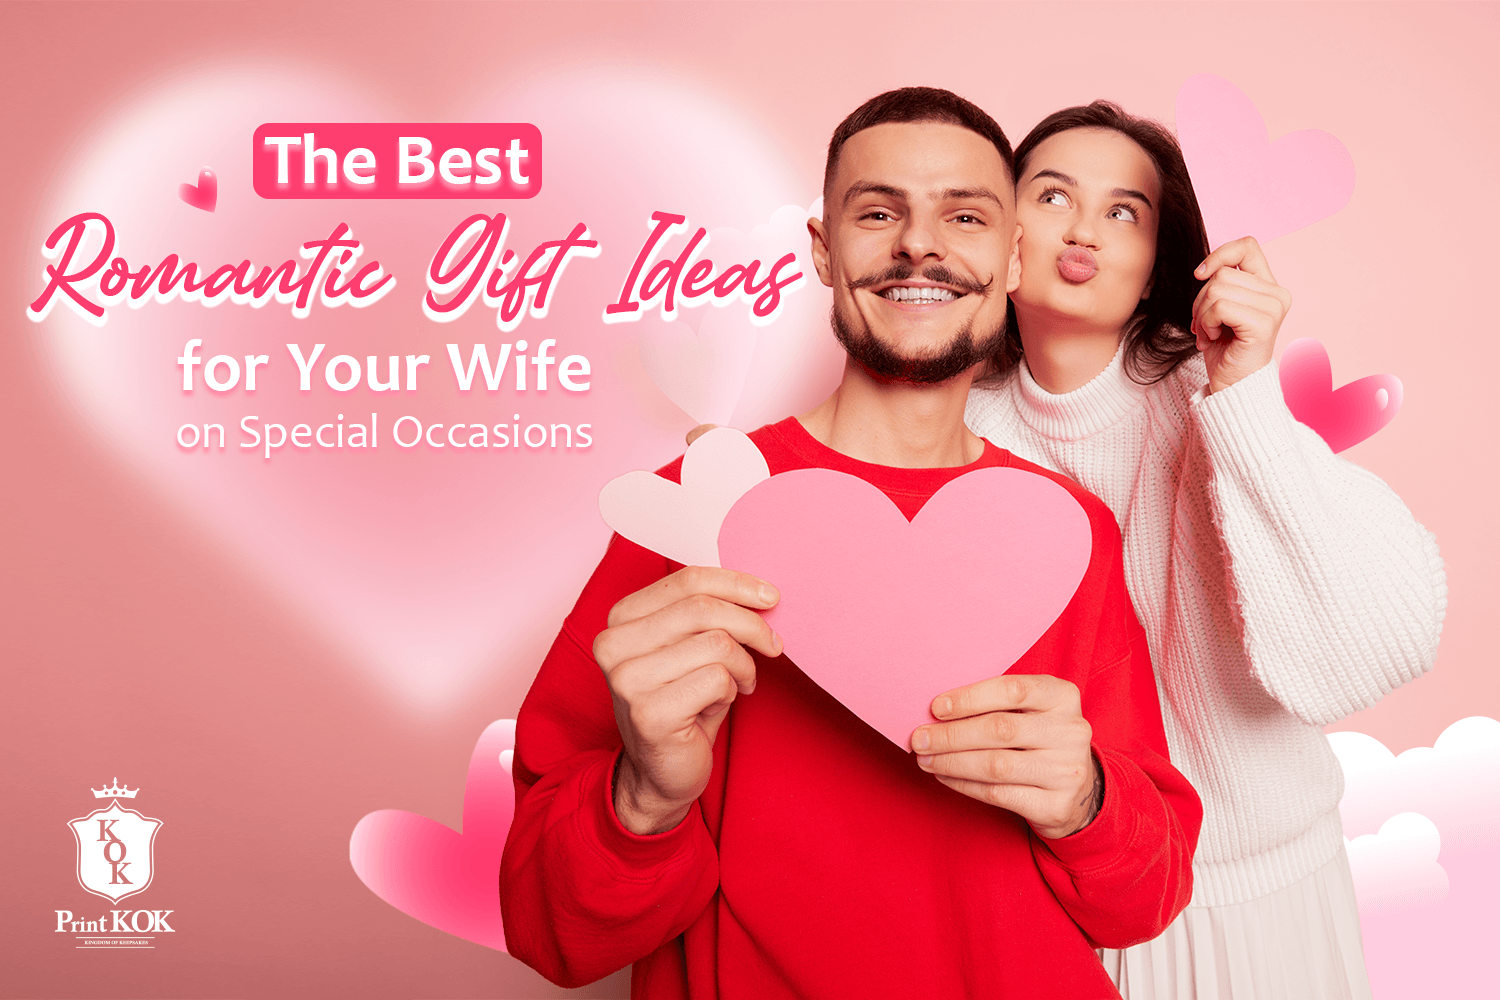 The Best Romantic Gift Ideas for Your Wife on Special Occasions